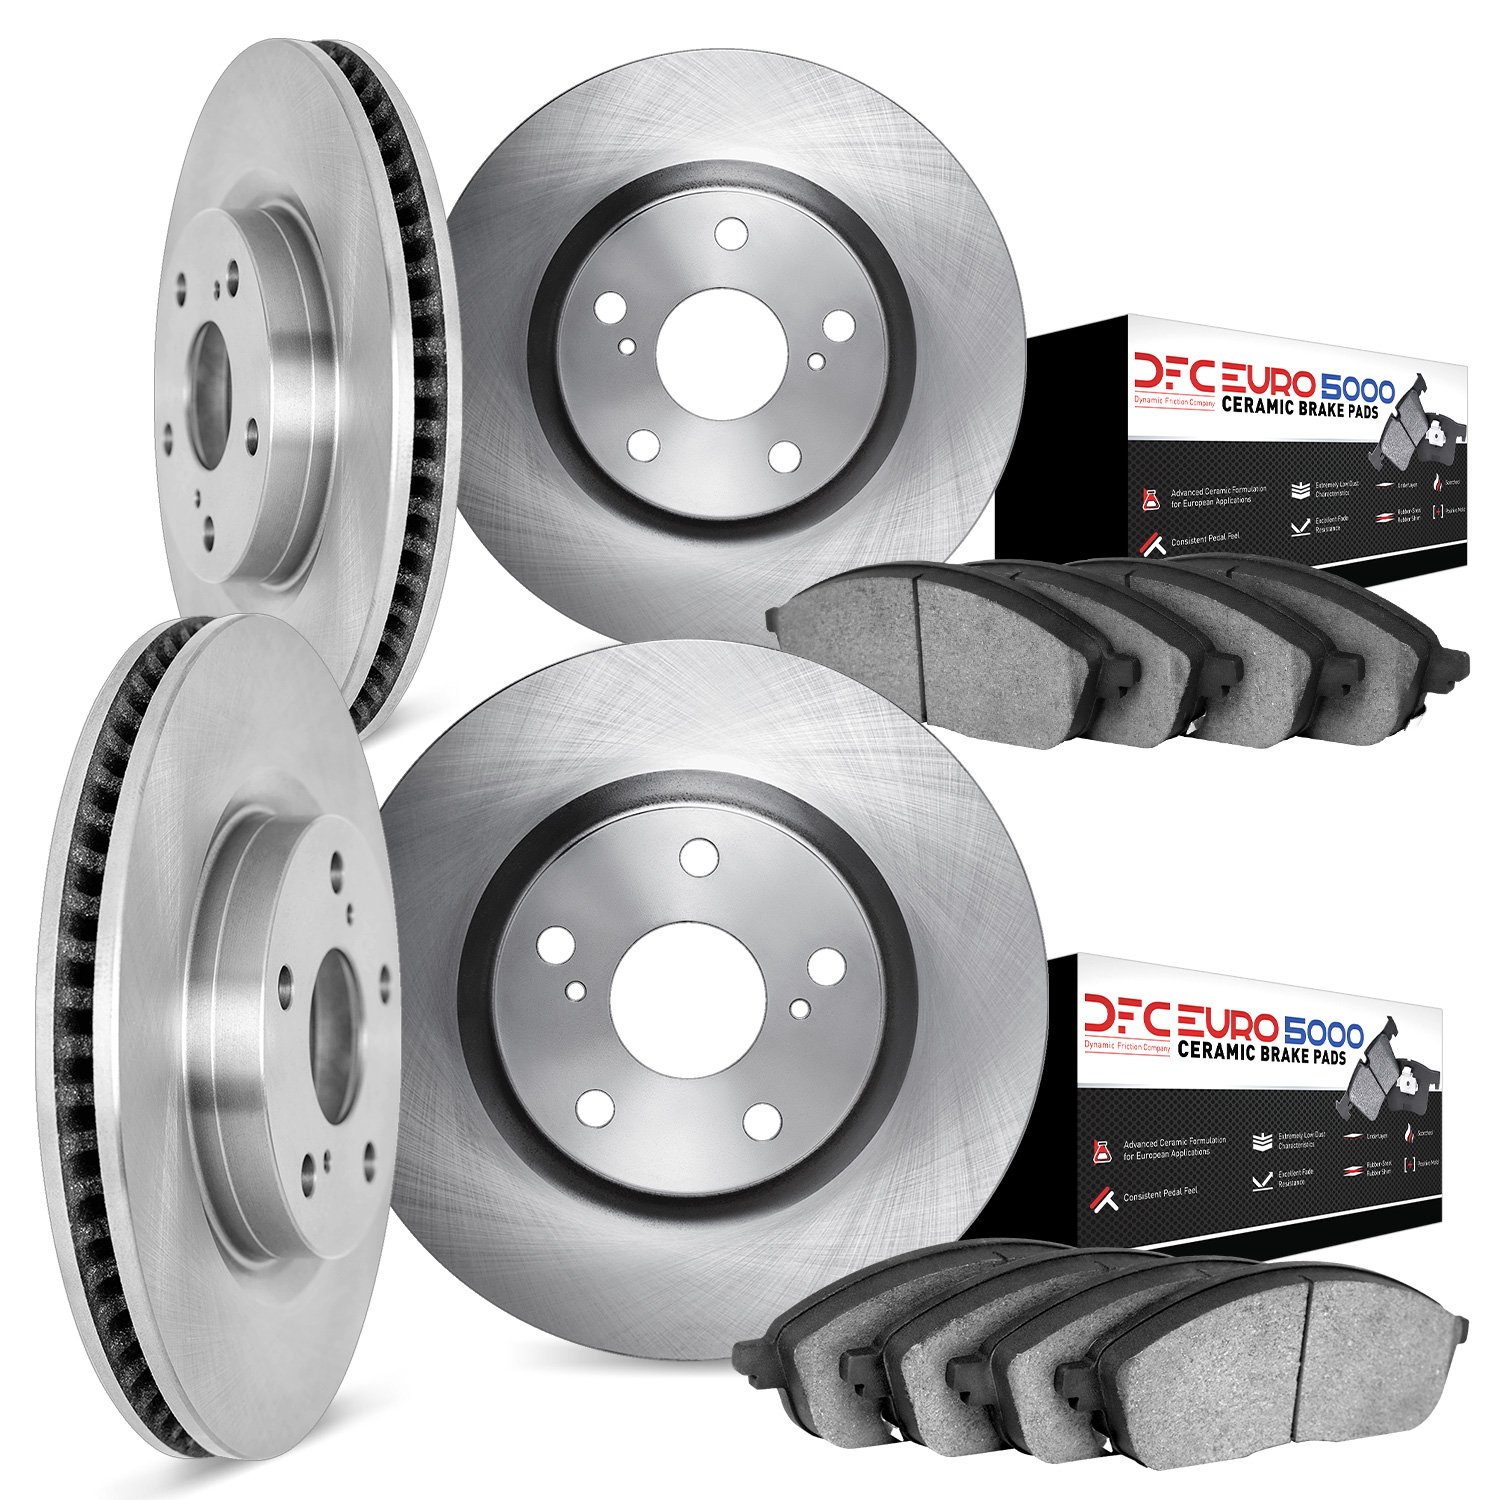 6604-11001 Brake Rotors w/5000 Euro Ceramic Brake Pads, 2005-2007 Land Rover, Position: Front and Rear